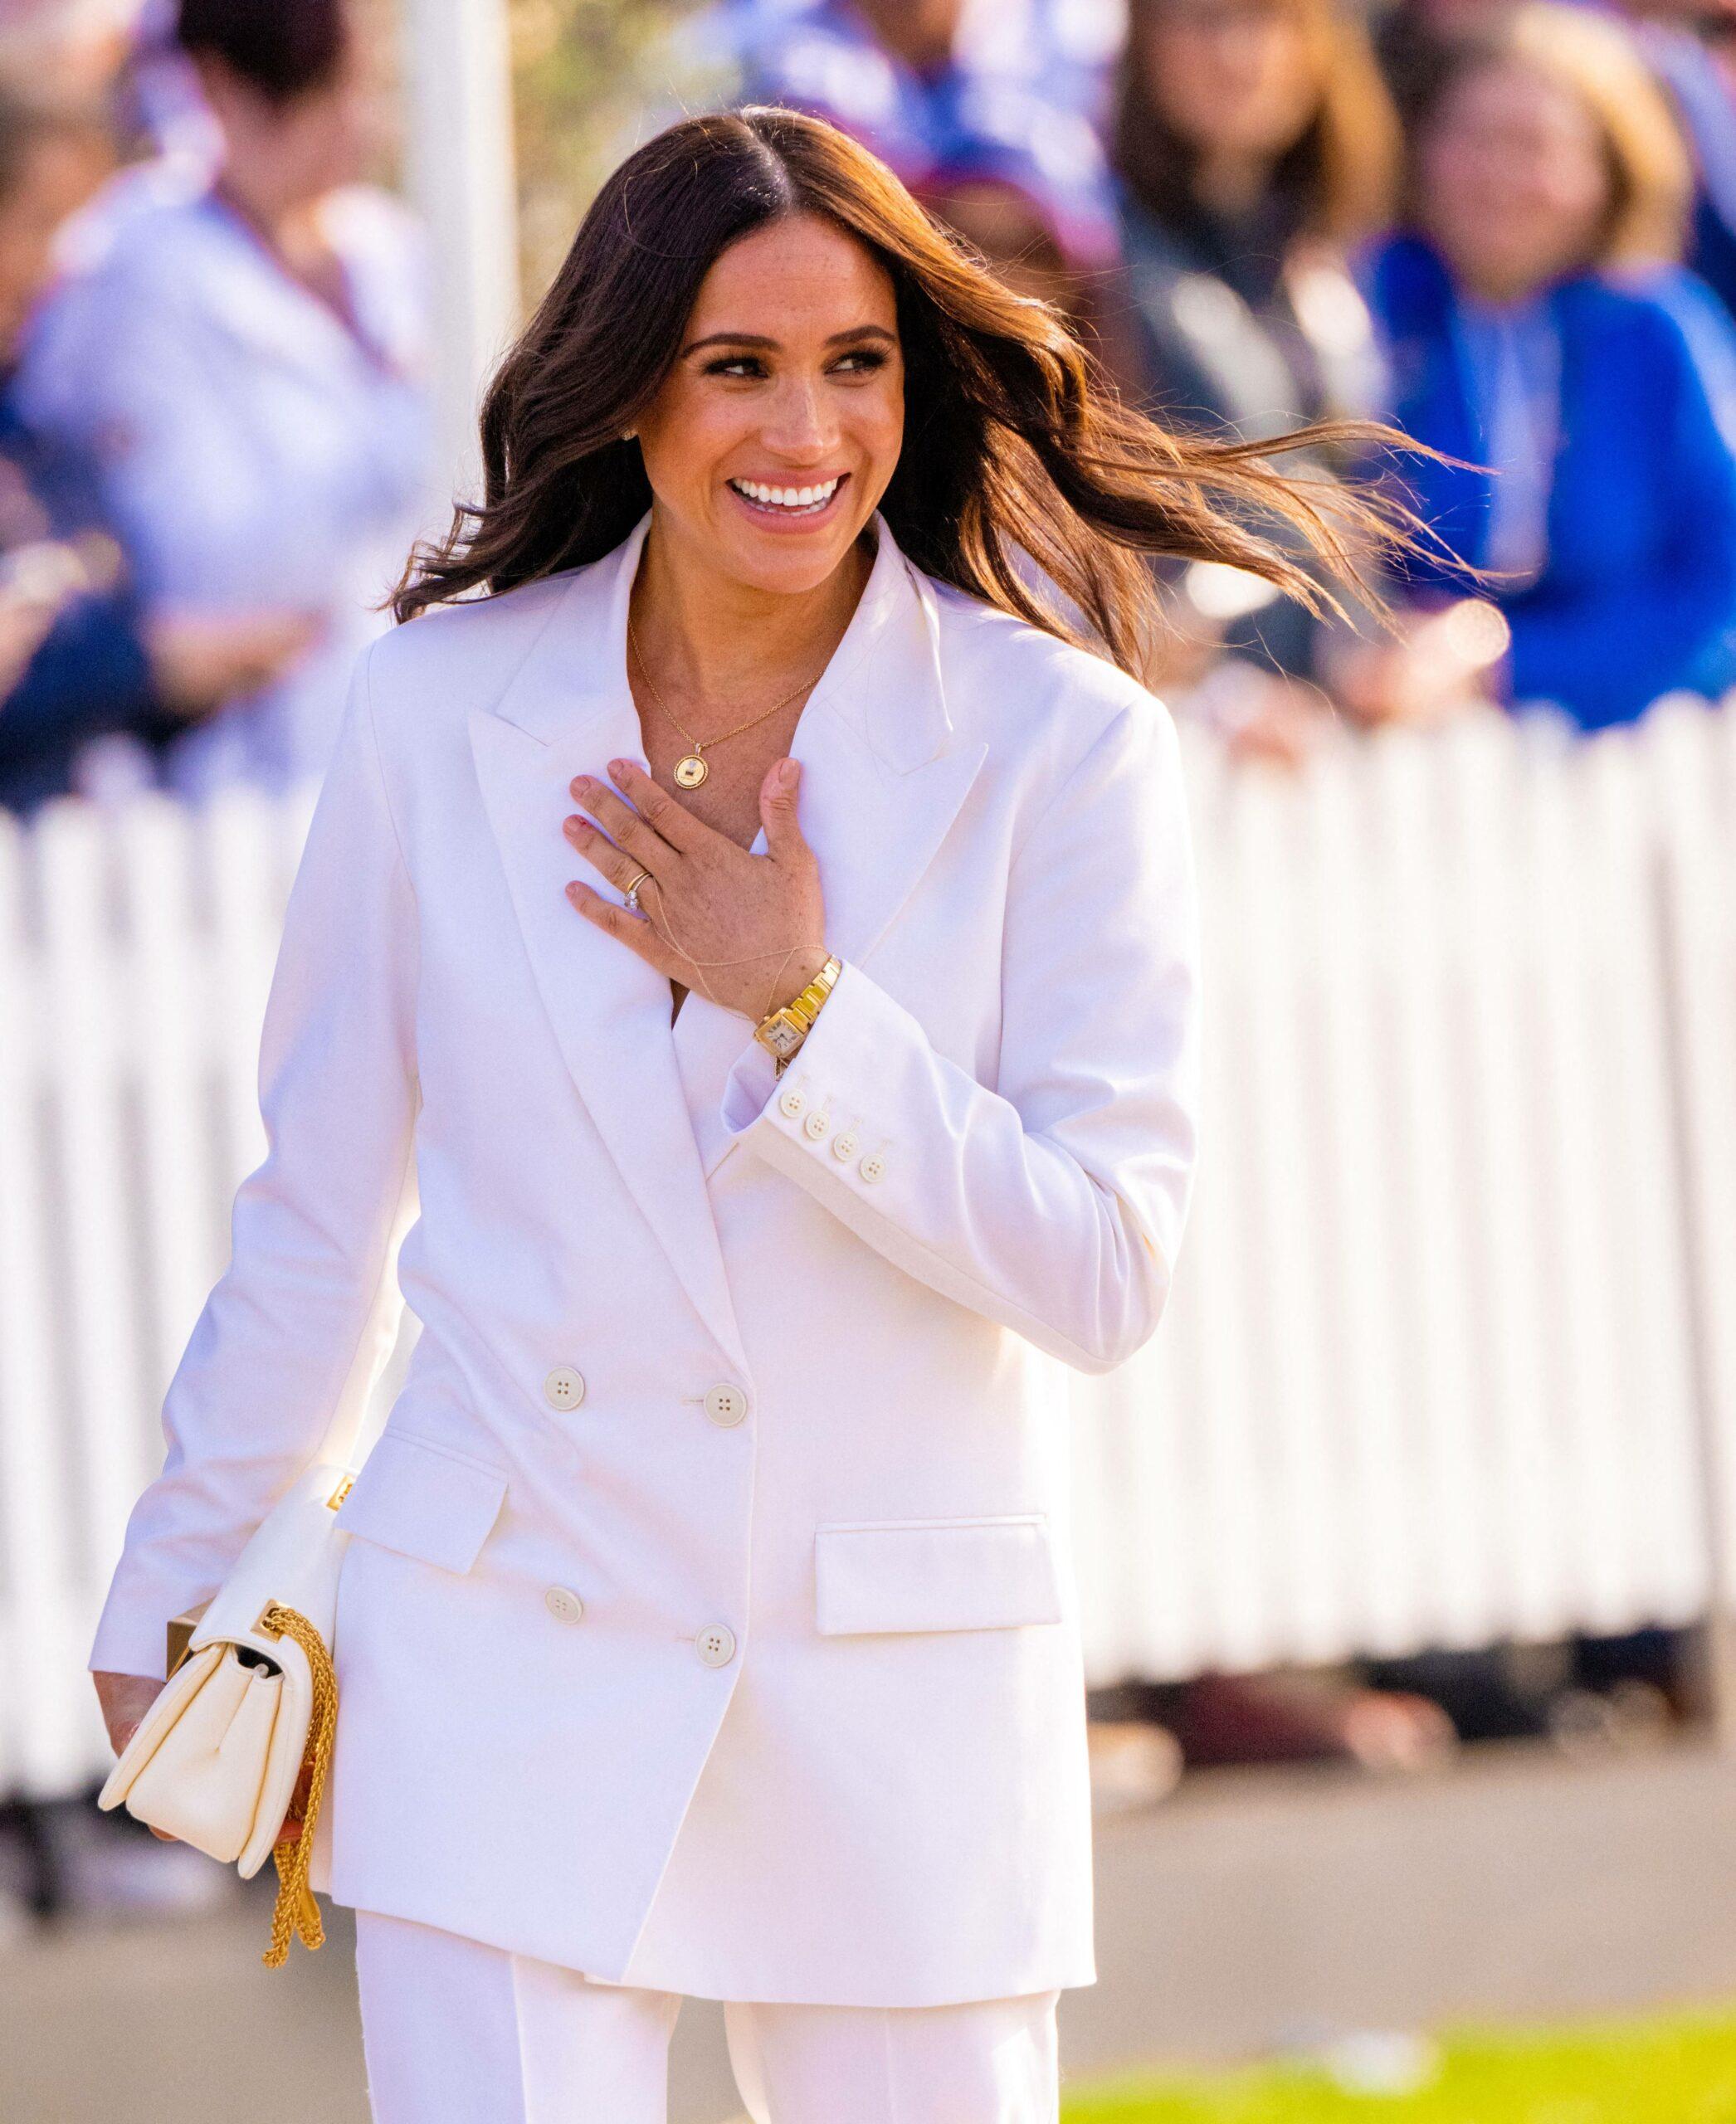 Photo of Meghan Markle smiling